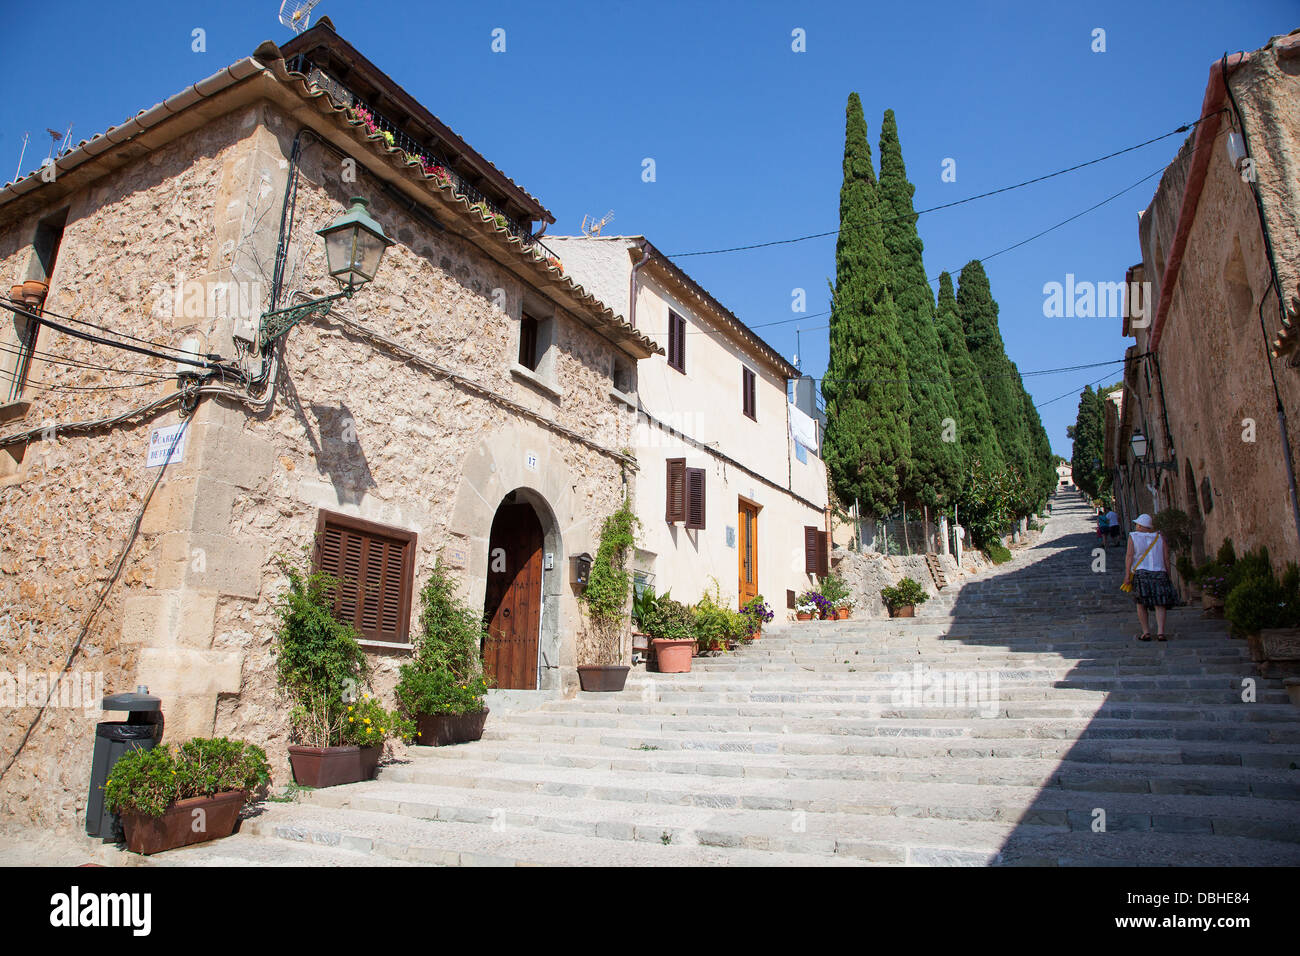 365 Calvari Steps in old town of Pollensa on the island of Majorca in the Balearic Islands Stock Photo